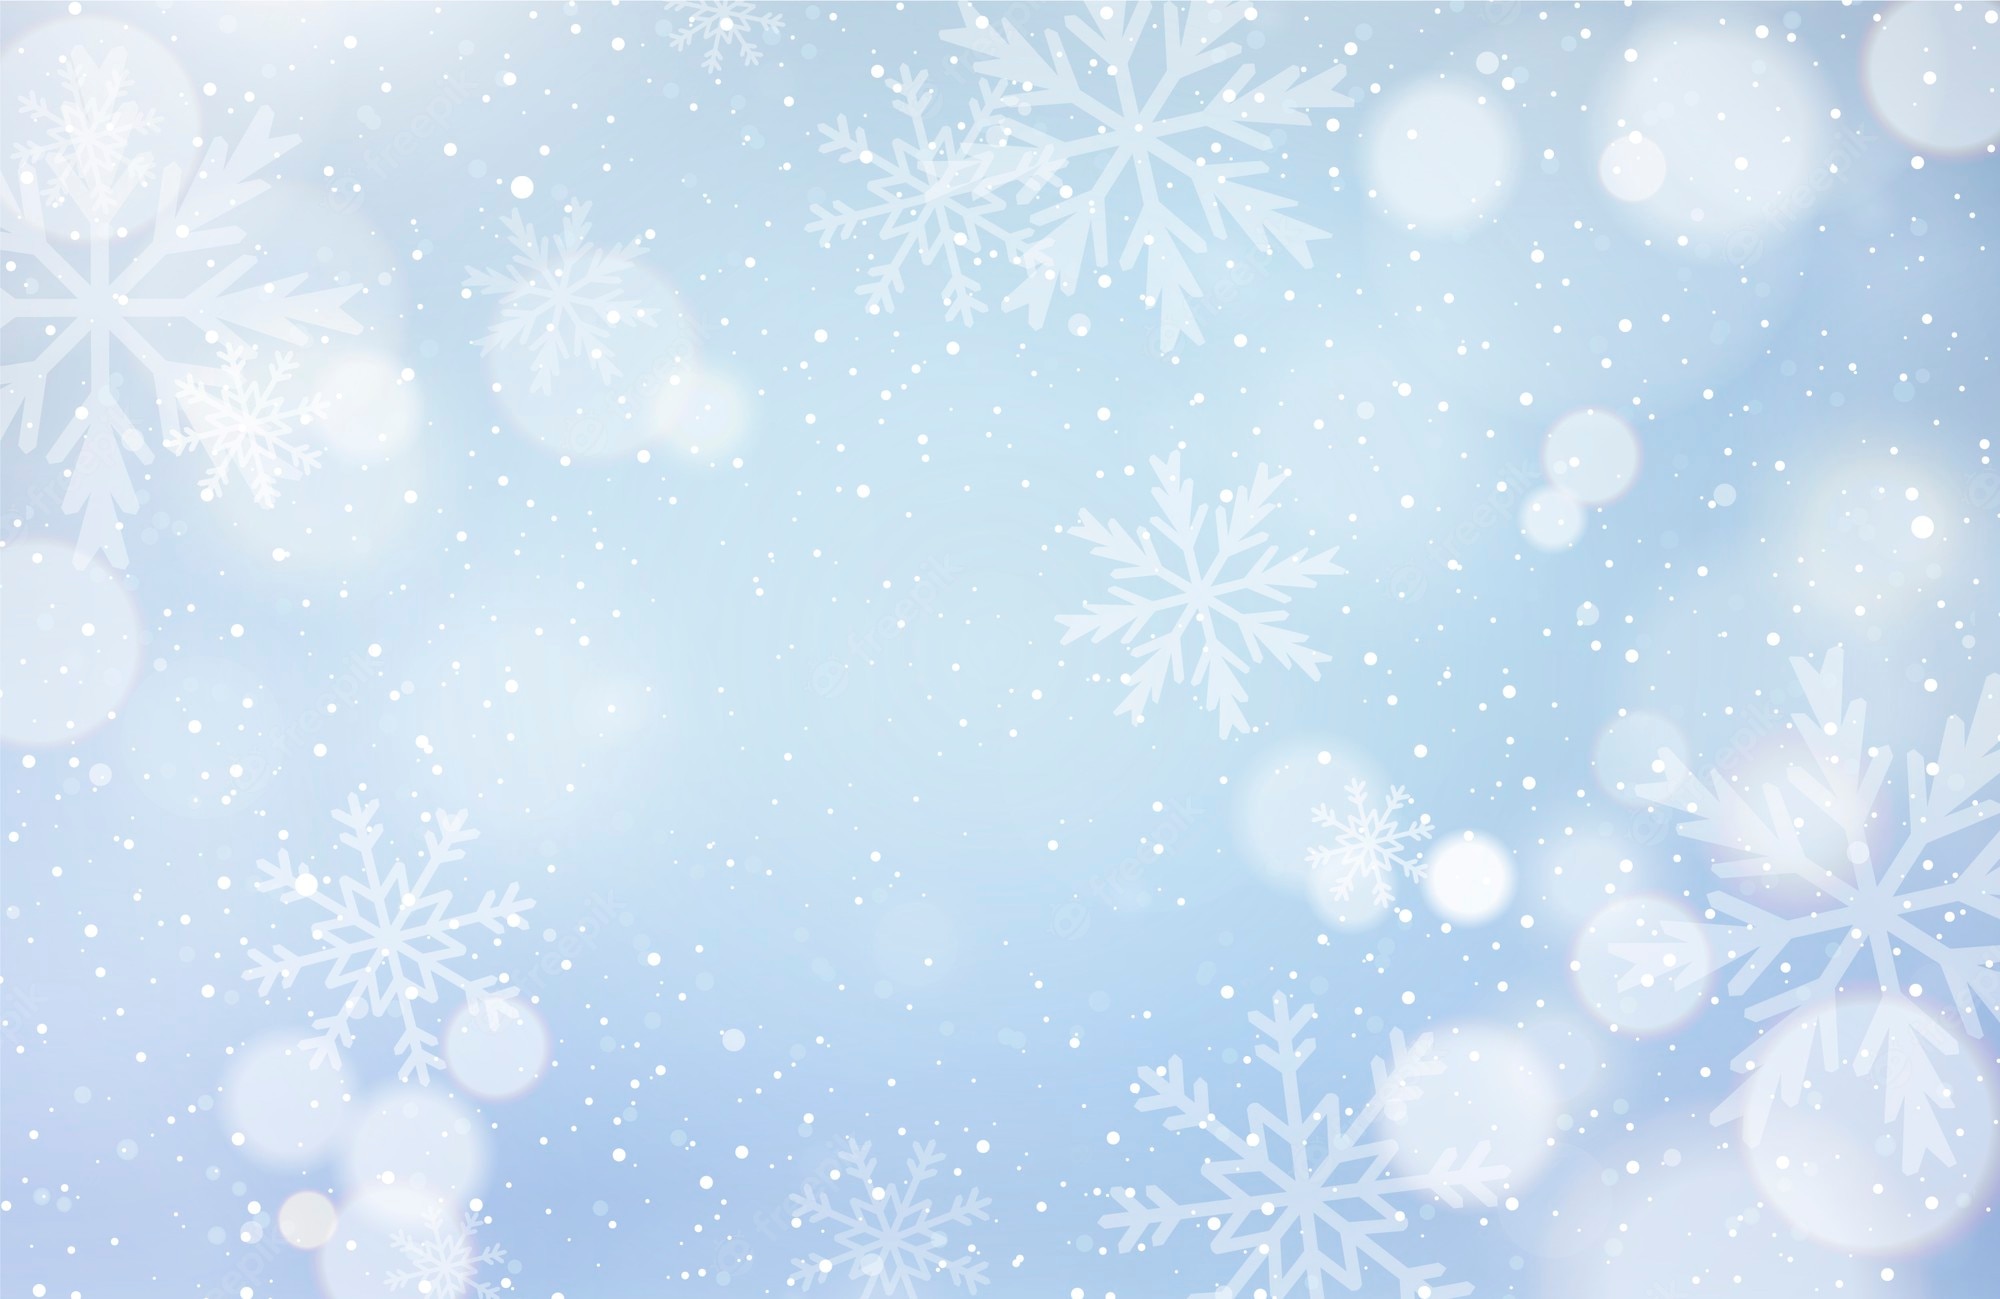 Winter background Image. Free Vectors, & PSD